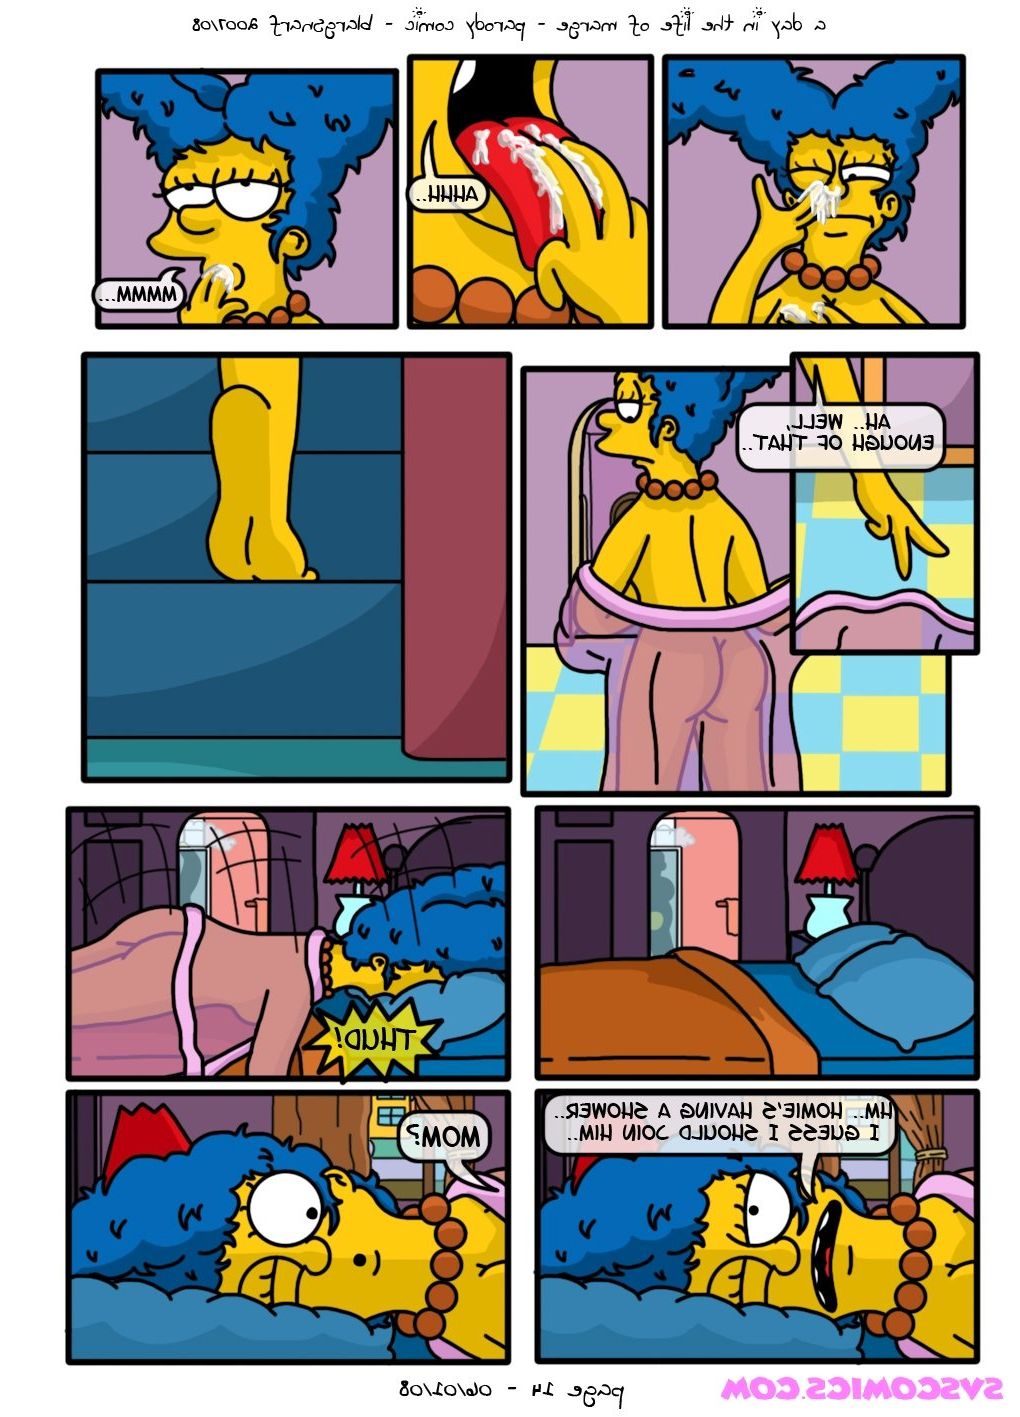 day-life-marge-simpsons image_9569.jpg